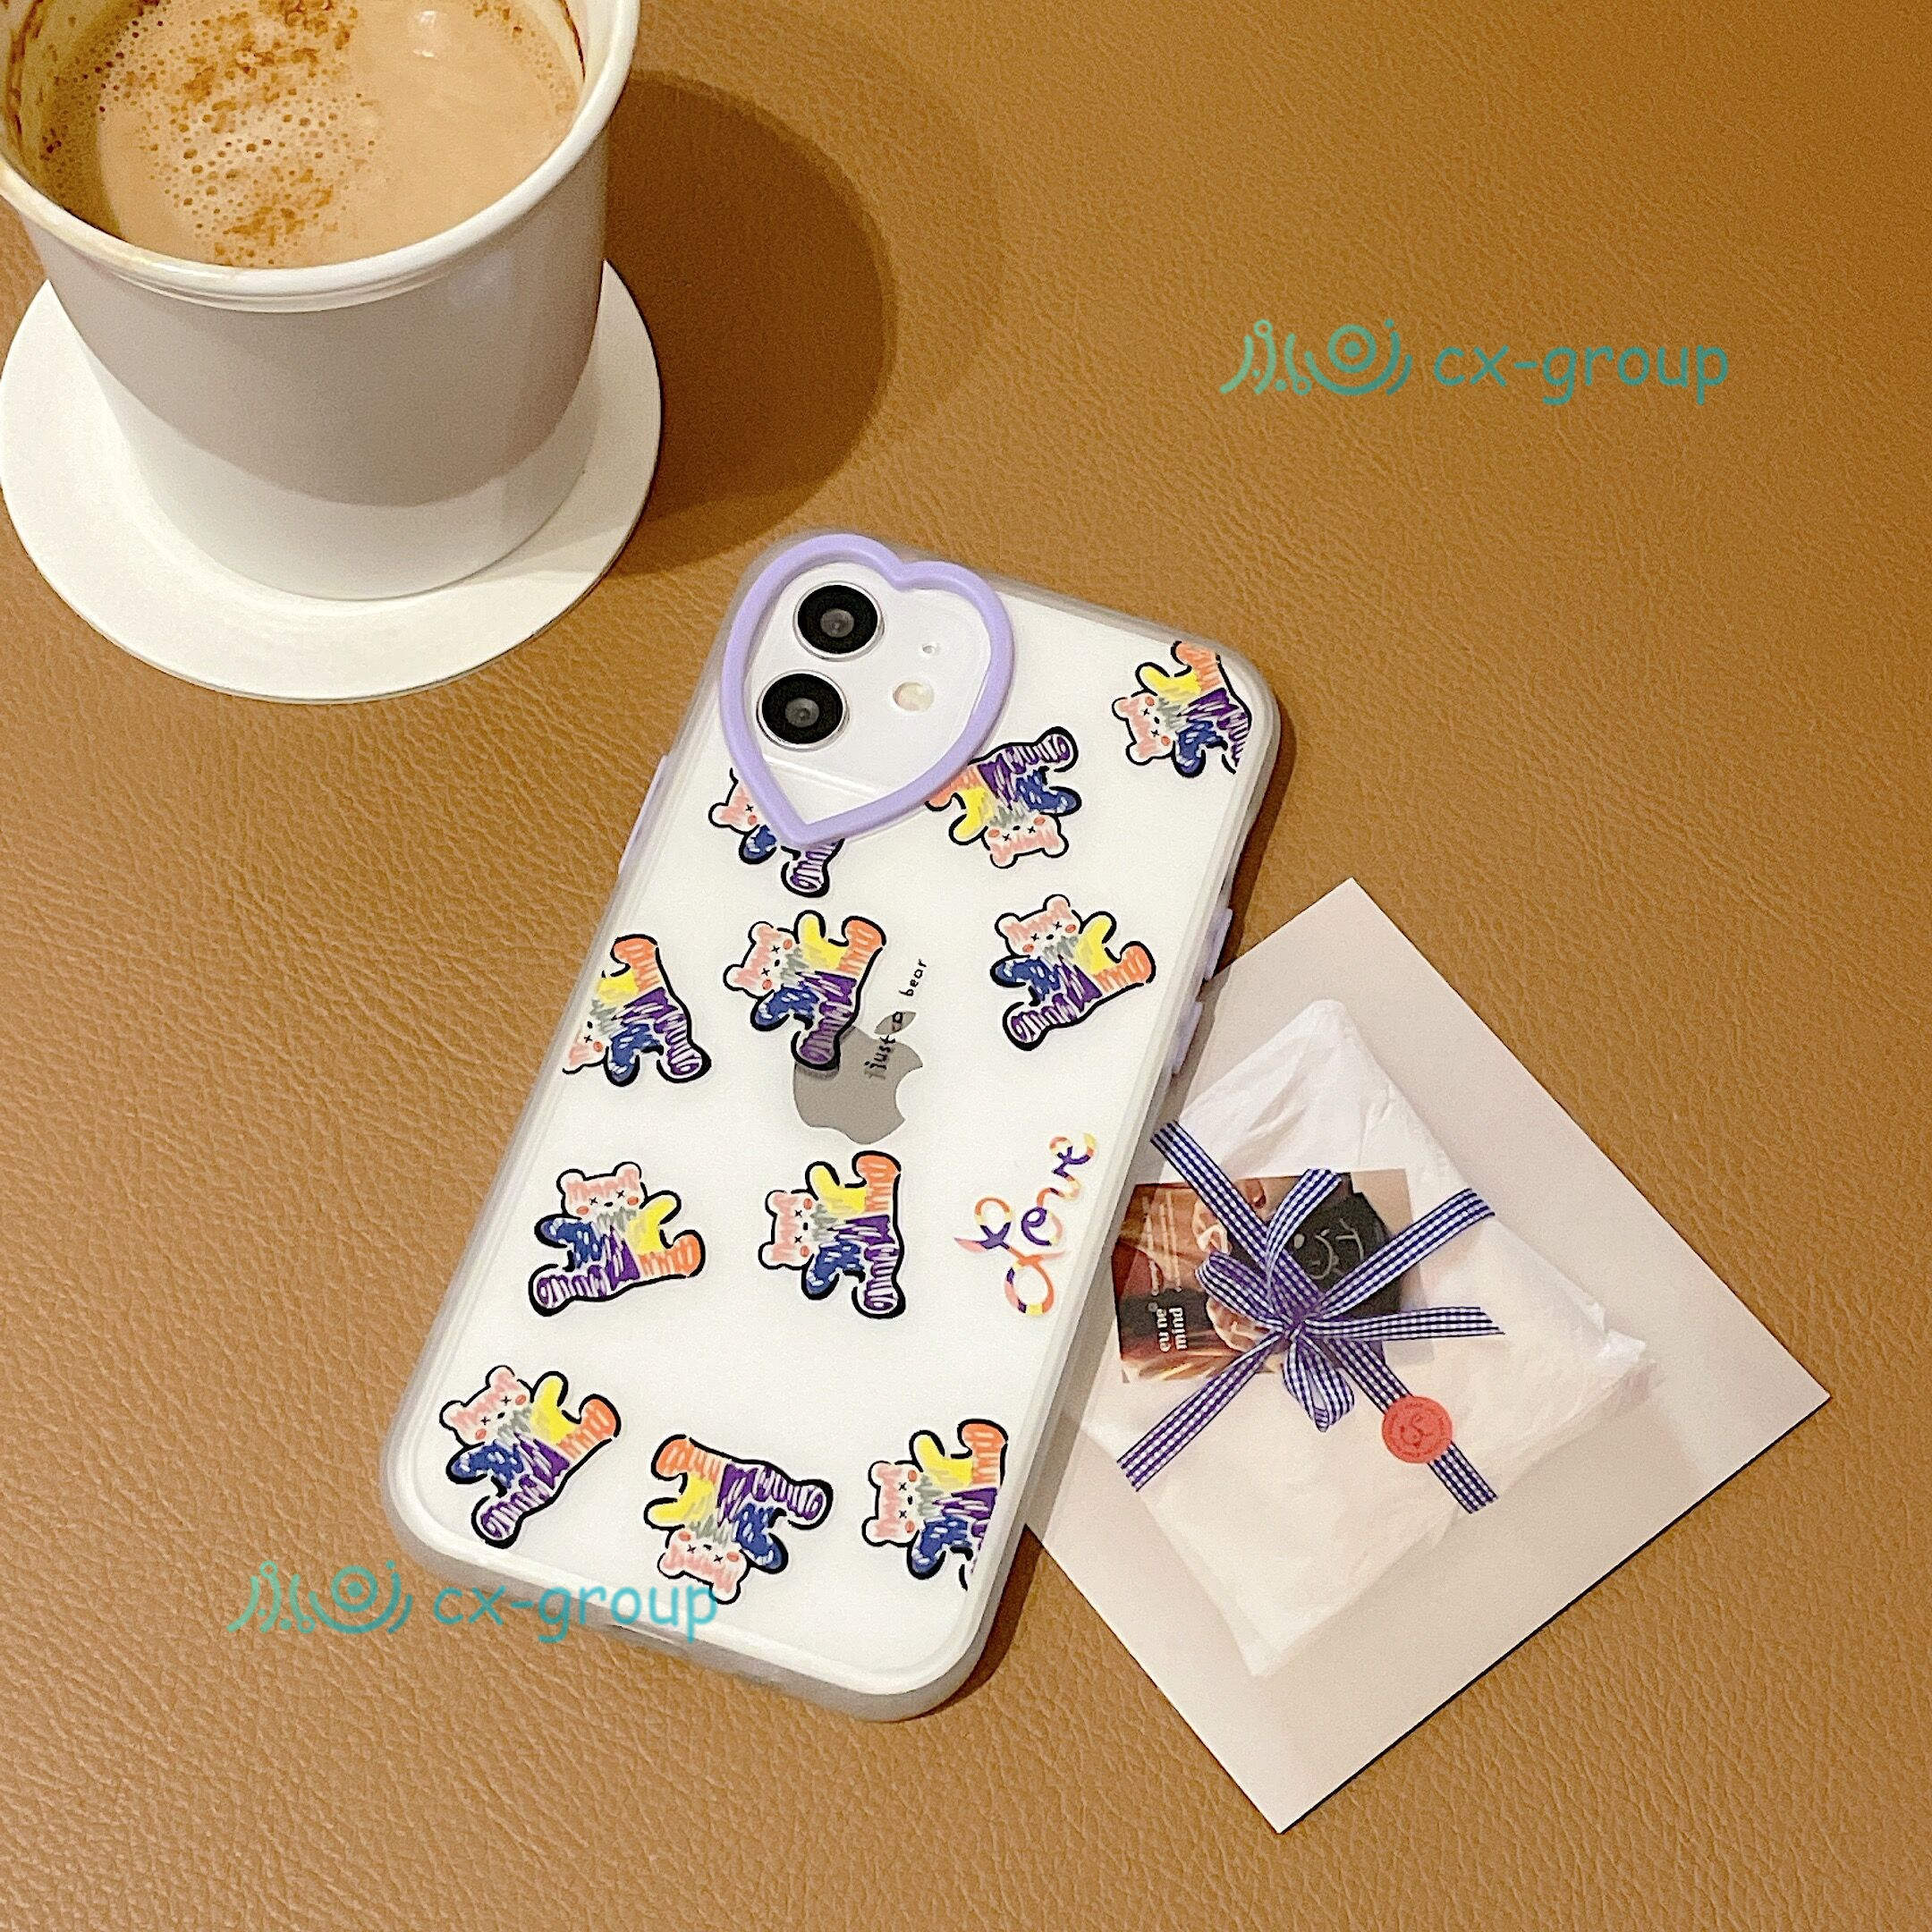 ốp iphone Cute Bear Heart-Shaped Lens Hole Case Apple iphone Case 7+ i7 8 plus soft casing iphone Casing 12 Pro max /12 mini premium soft case for iphone 11 Pro X XS MAX XR full silicone cover camera protector cover